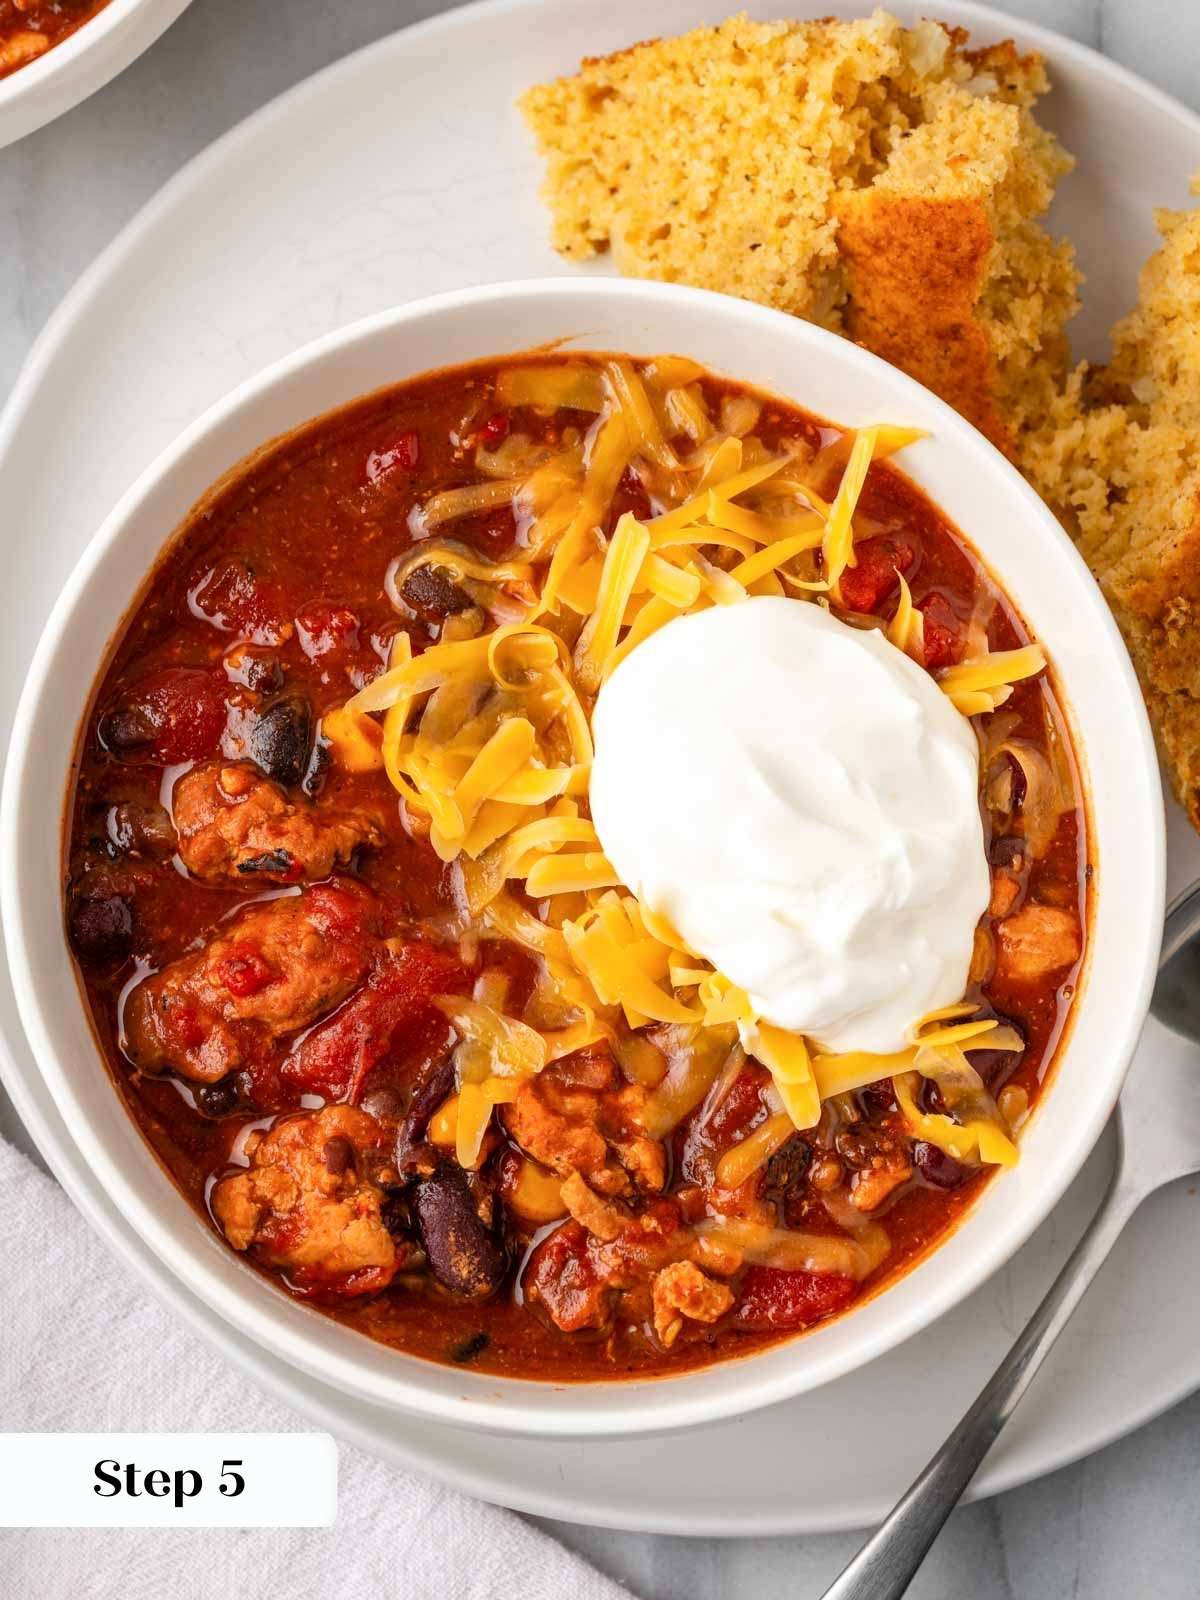 chipotle chili with sour cream and cheese.